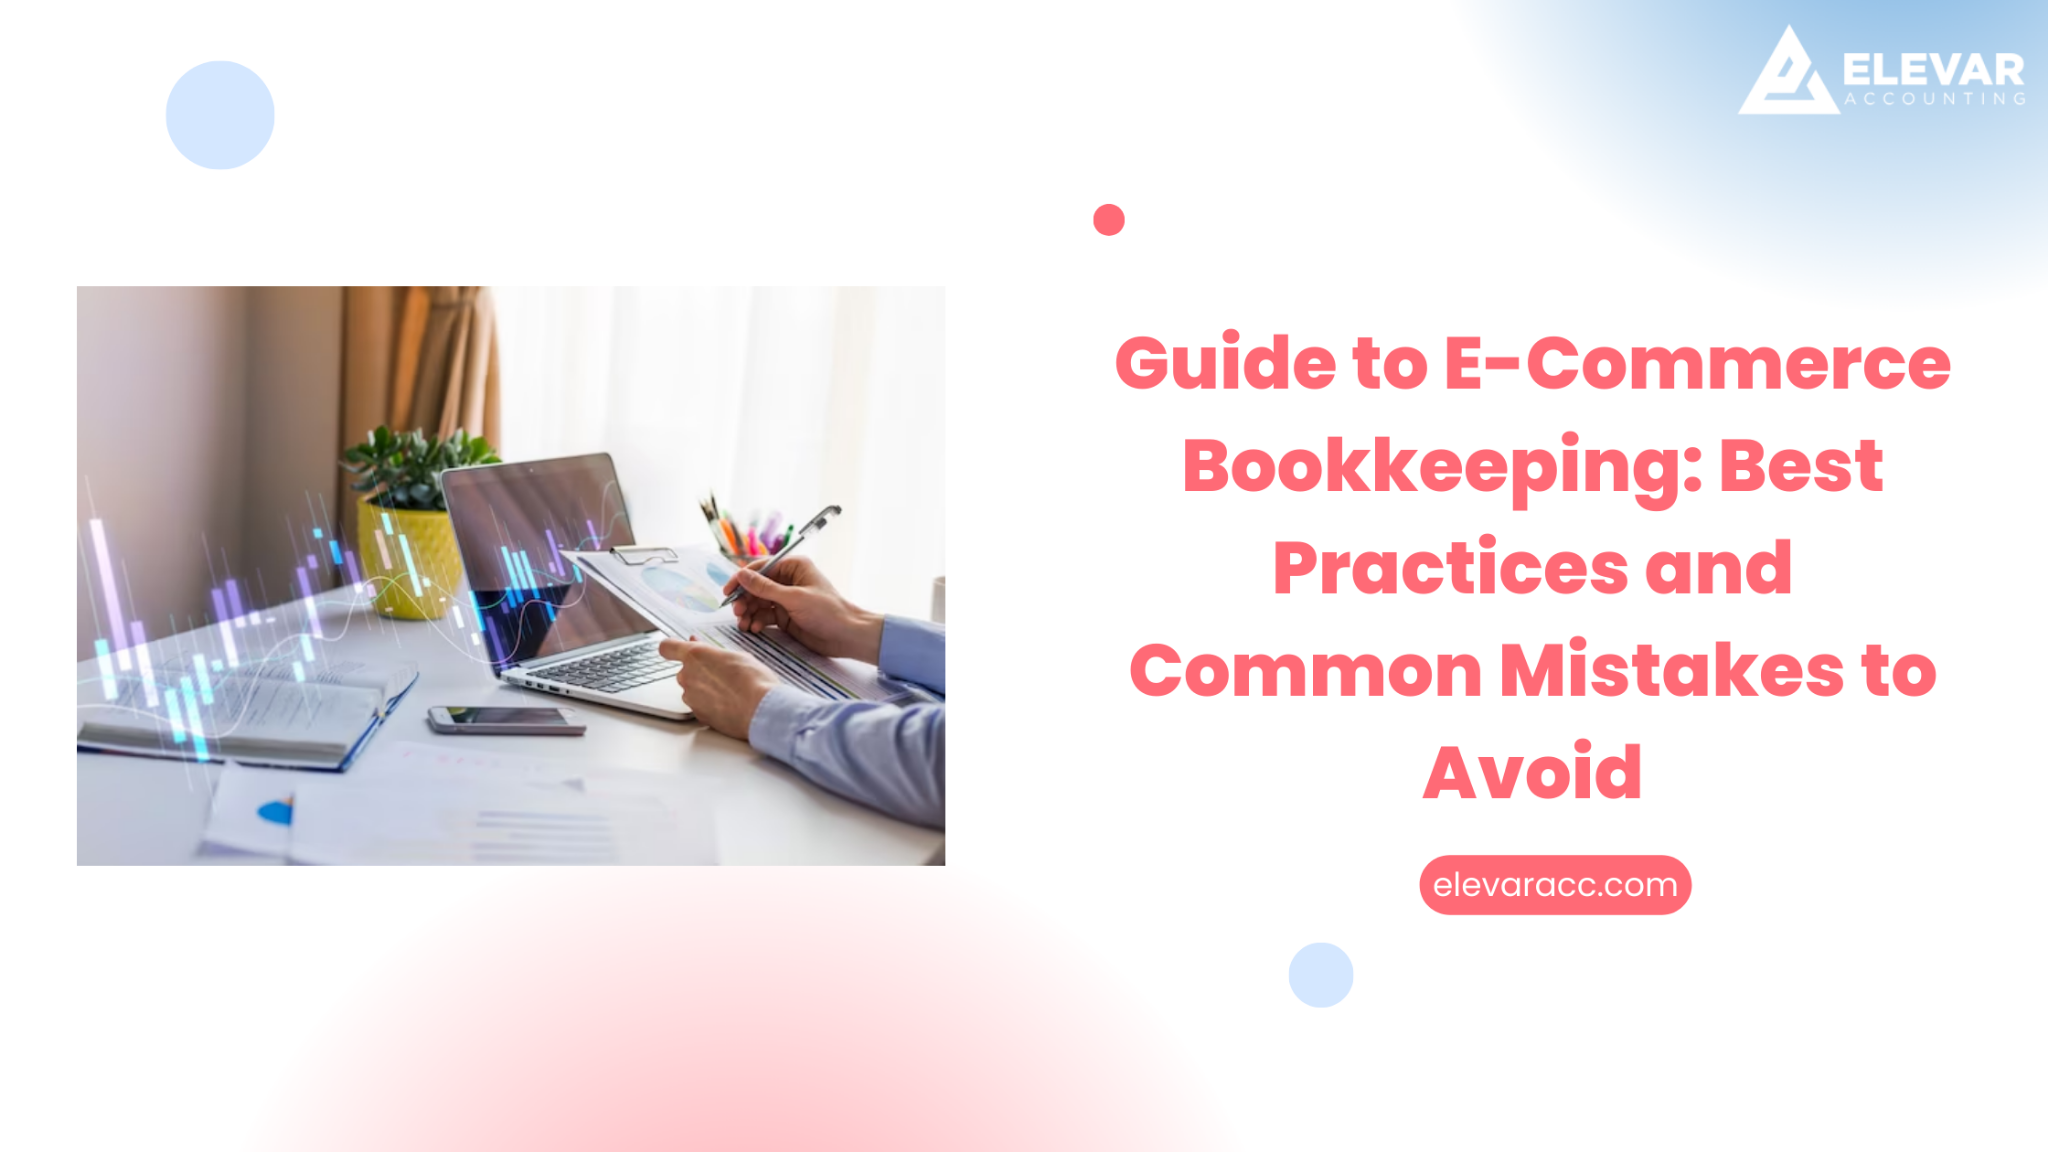 Guide to E-Commerce Bookkeeping: Best Practices and Common Mistakes to Avoid  